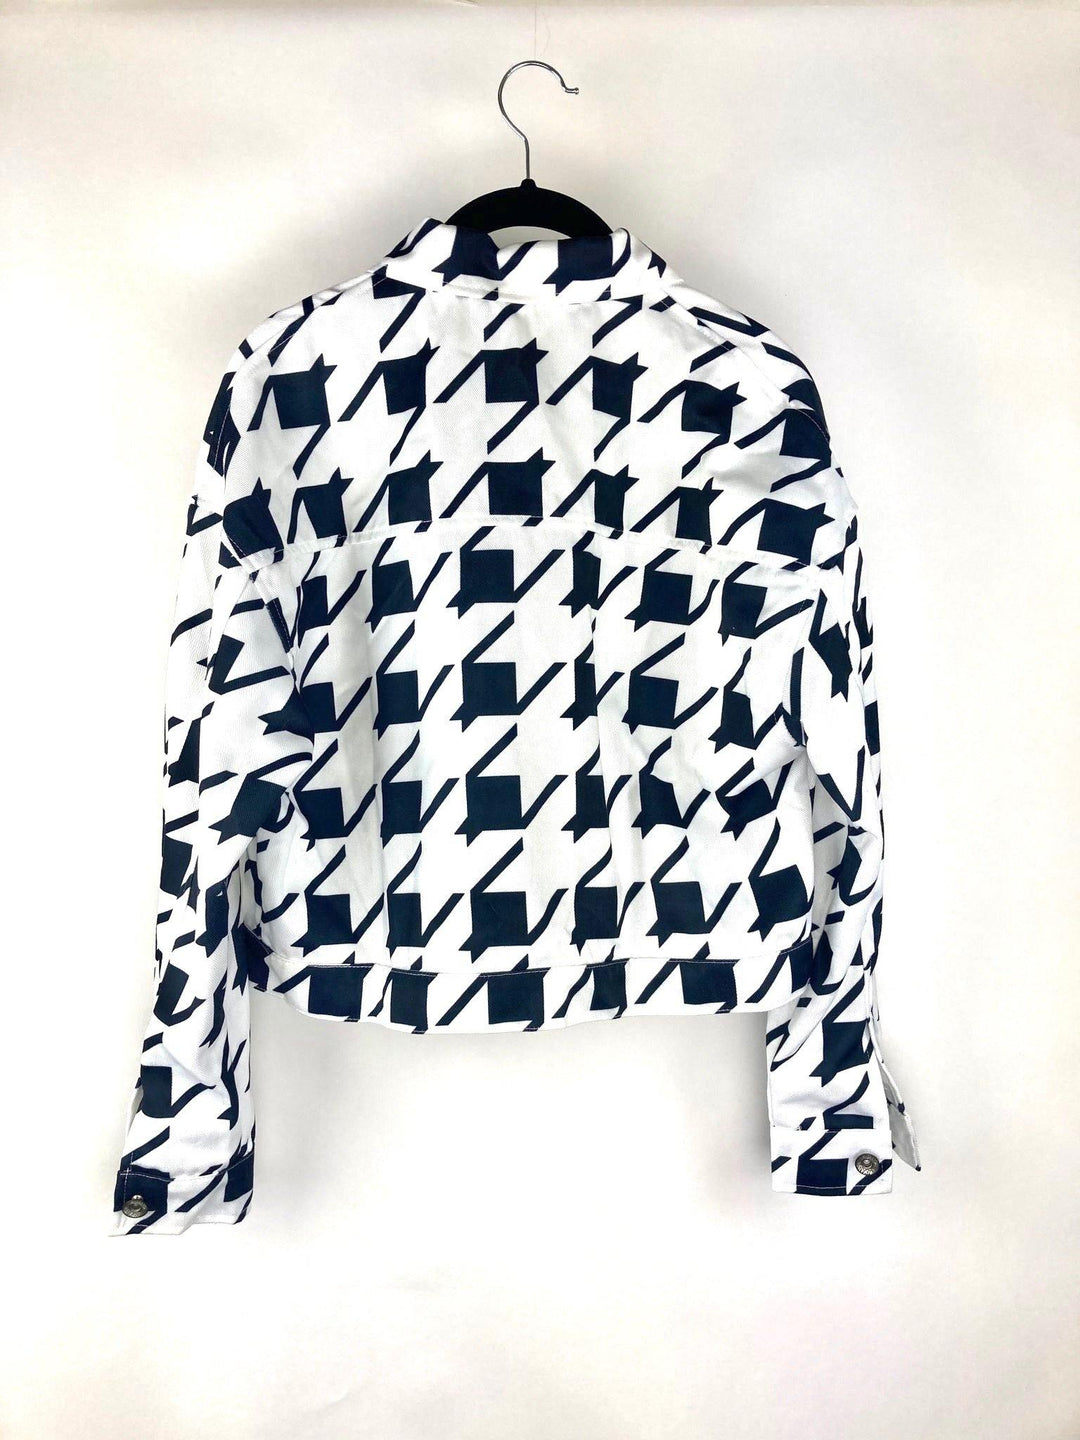 Zaful Blue And White Houndstooth Jacket - Small - The Fashion Foundation - {{ discount designer}}